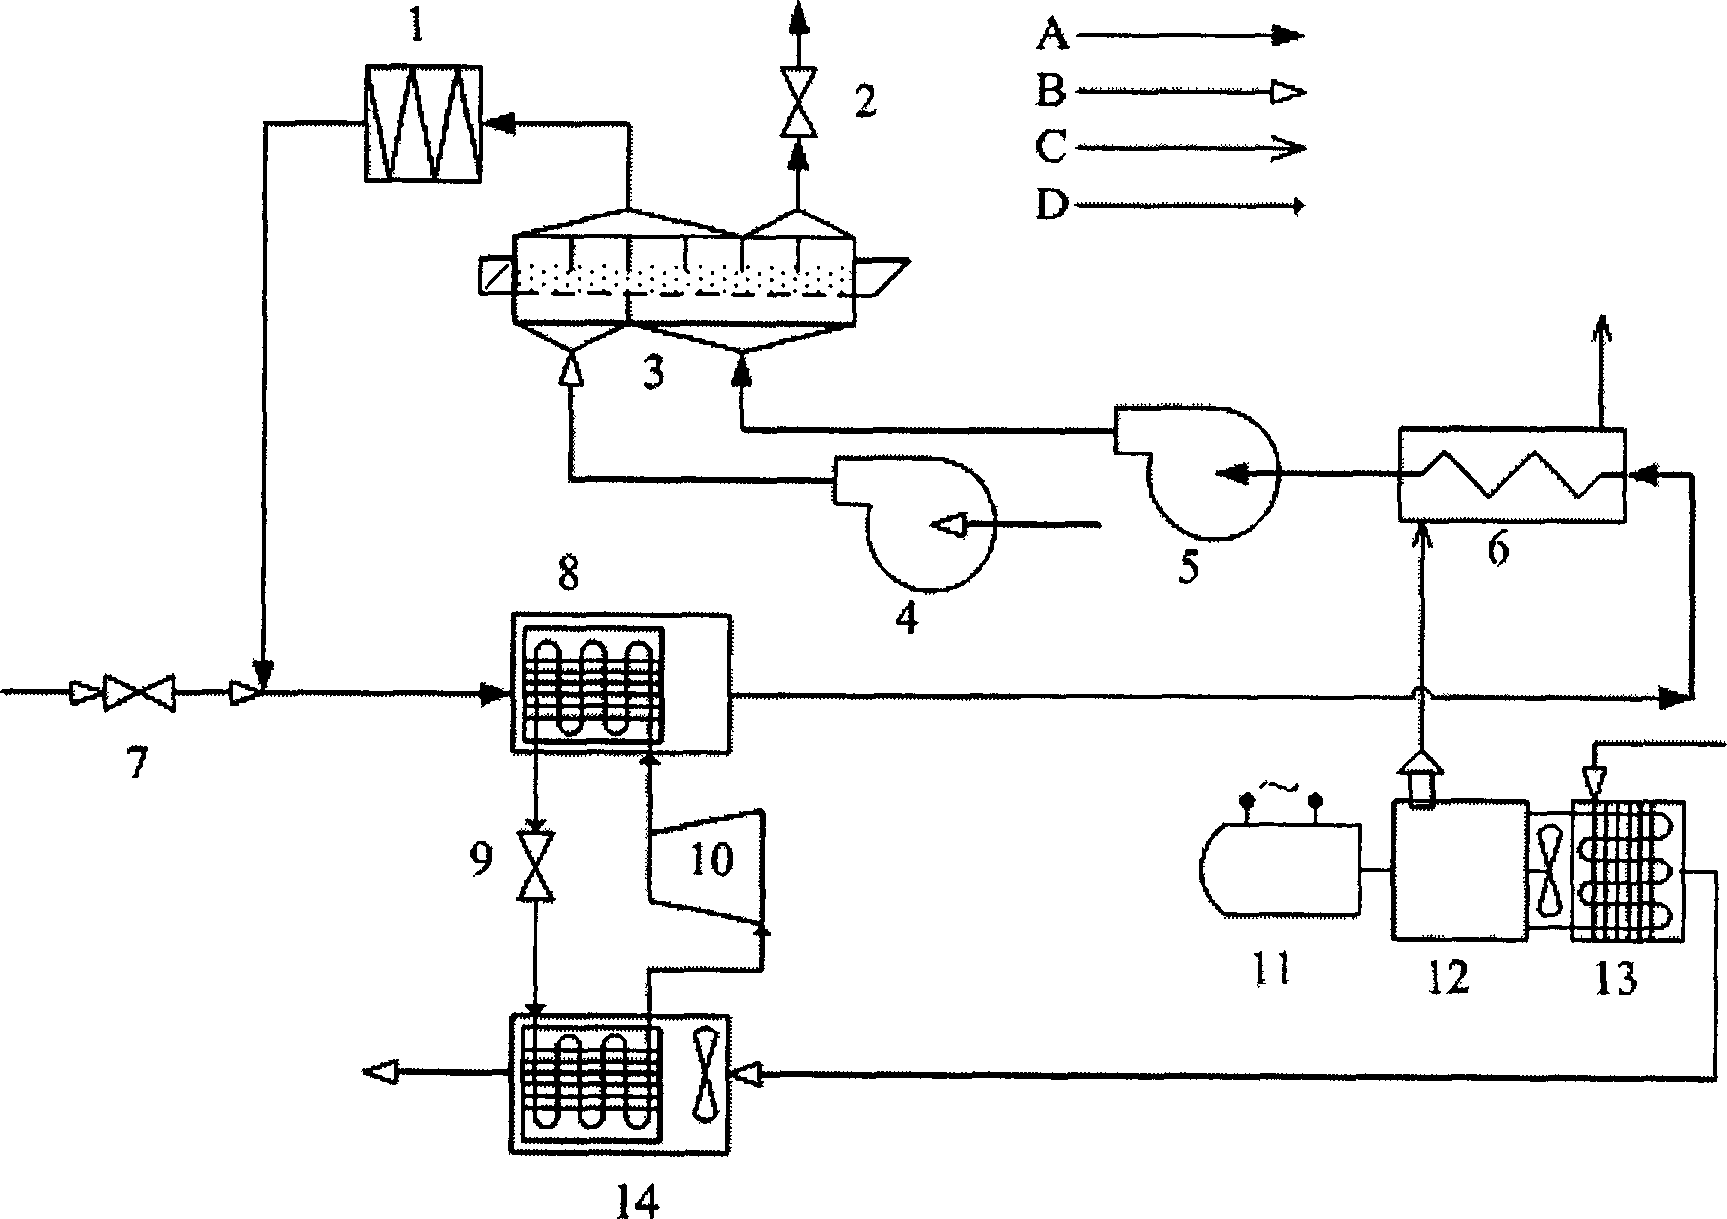 Internal combustion engine driving heat pump fluidized bed drying device capable of recovering used heat